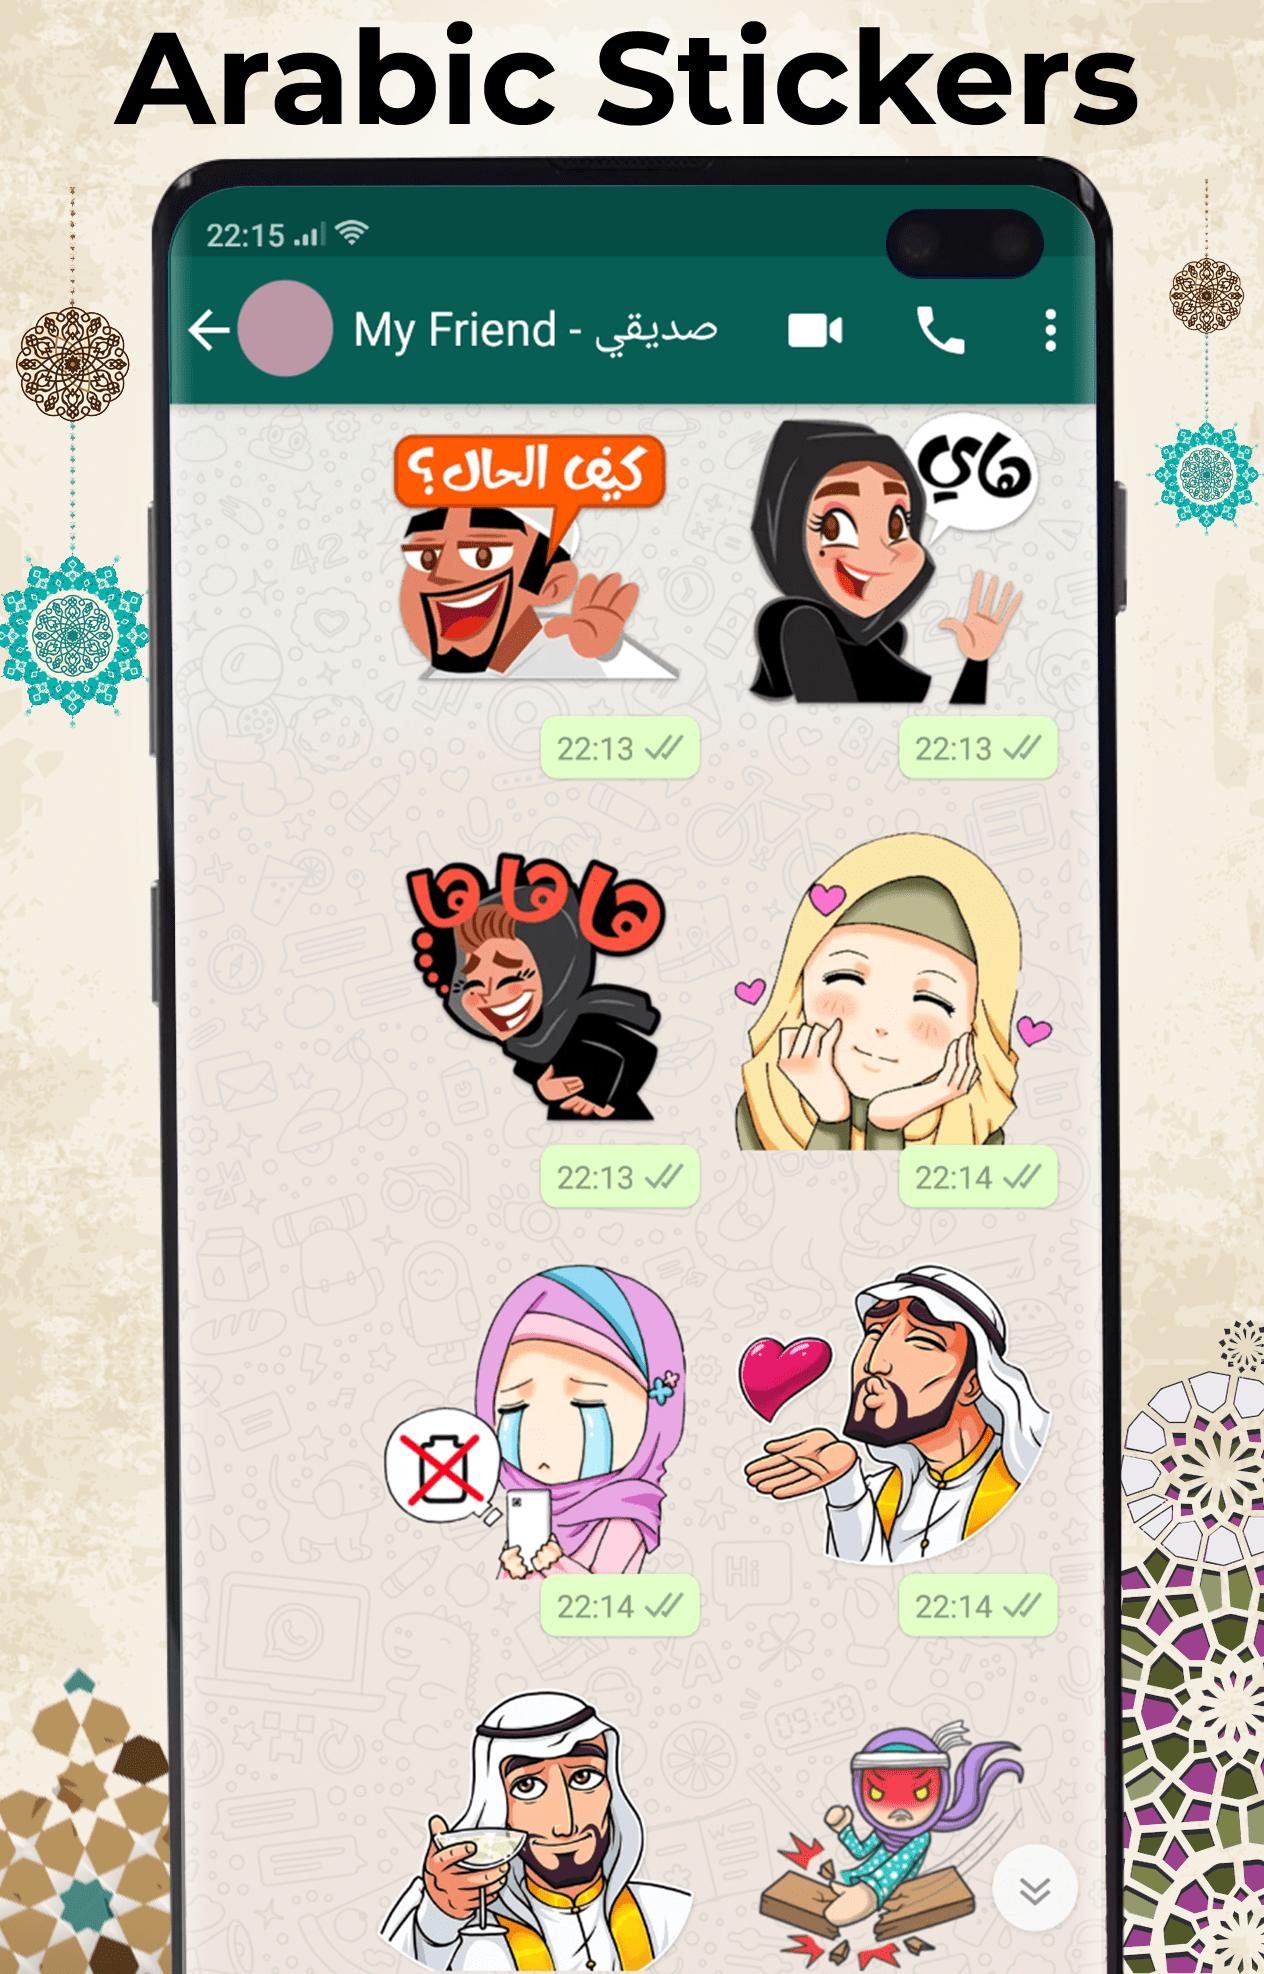 Islamic Arabic Stickers For Whatsapp 2020 For Android Apk Download